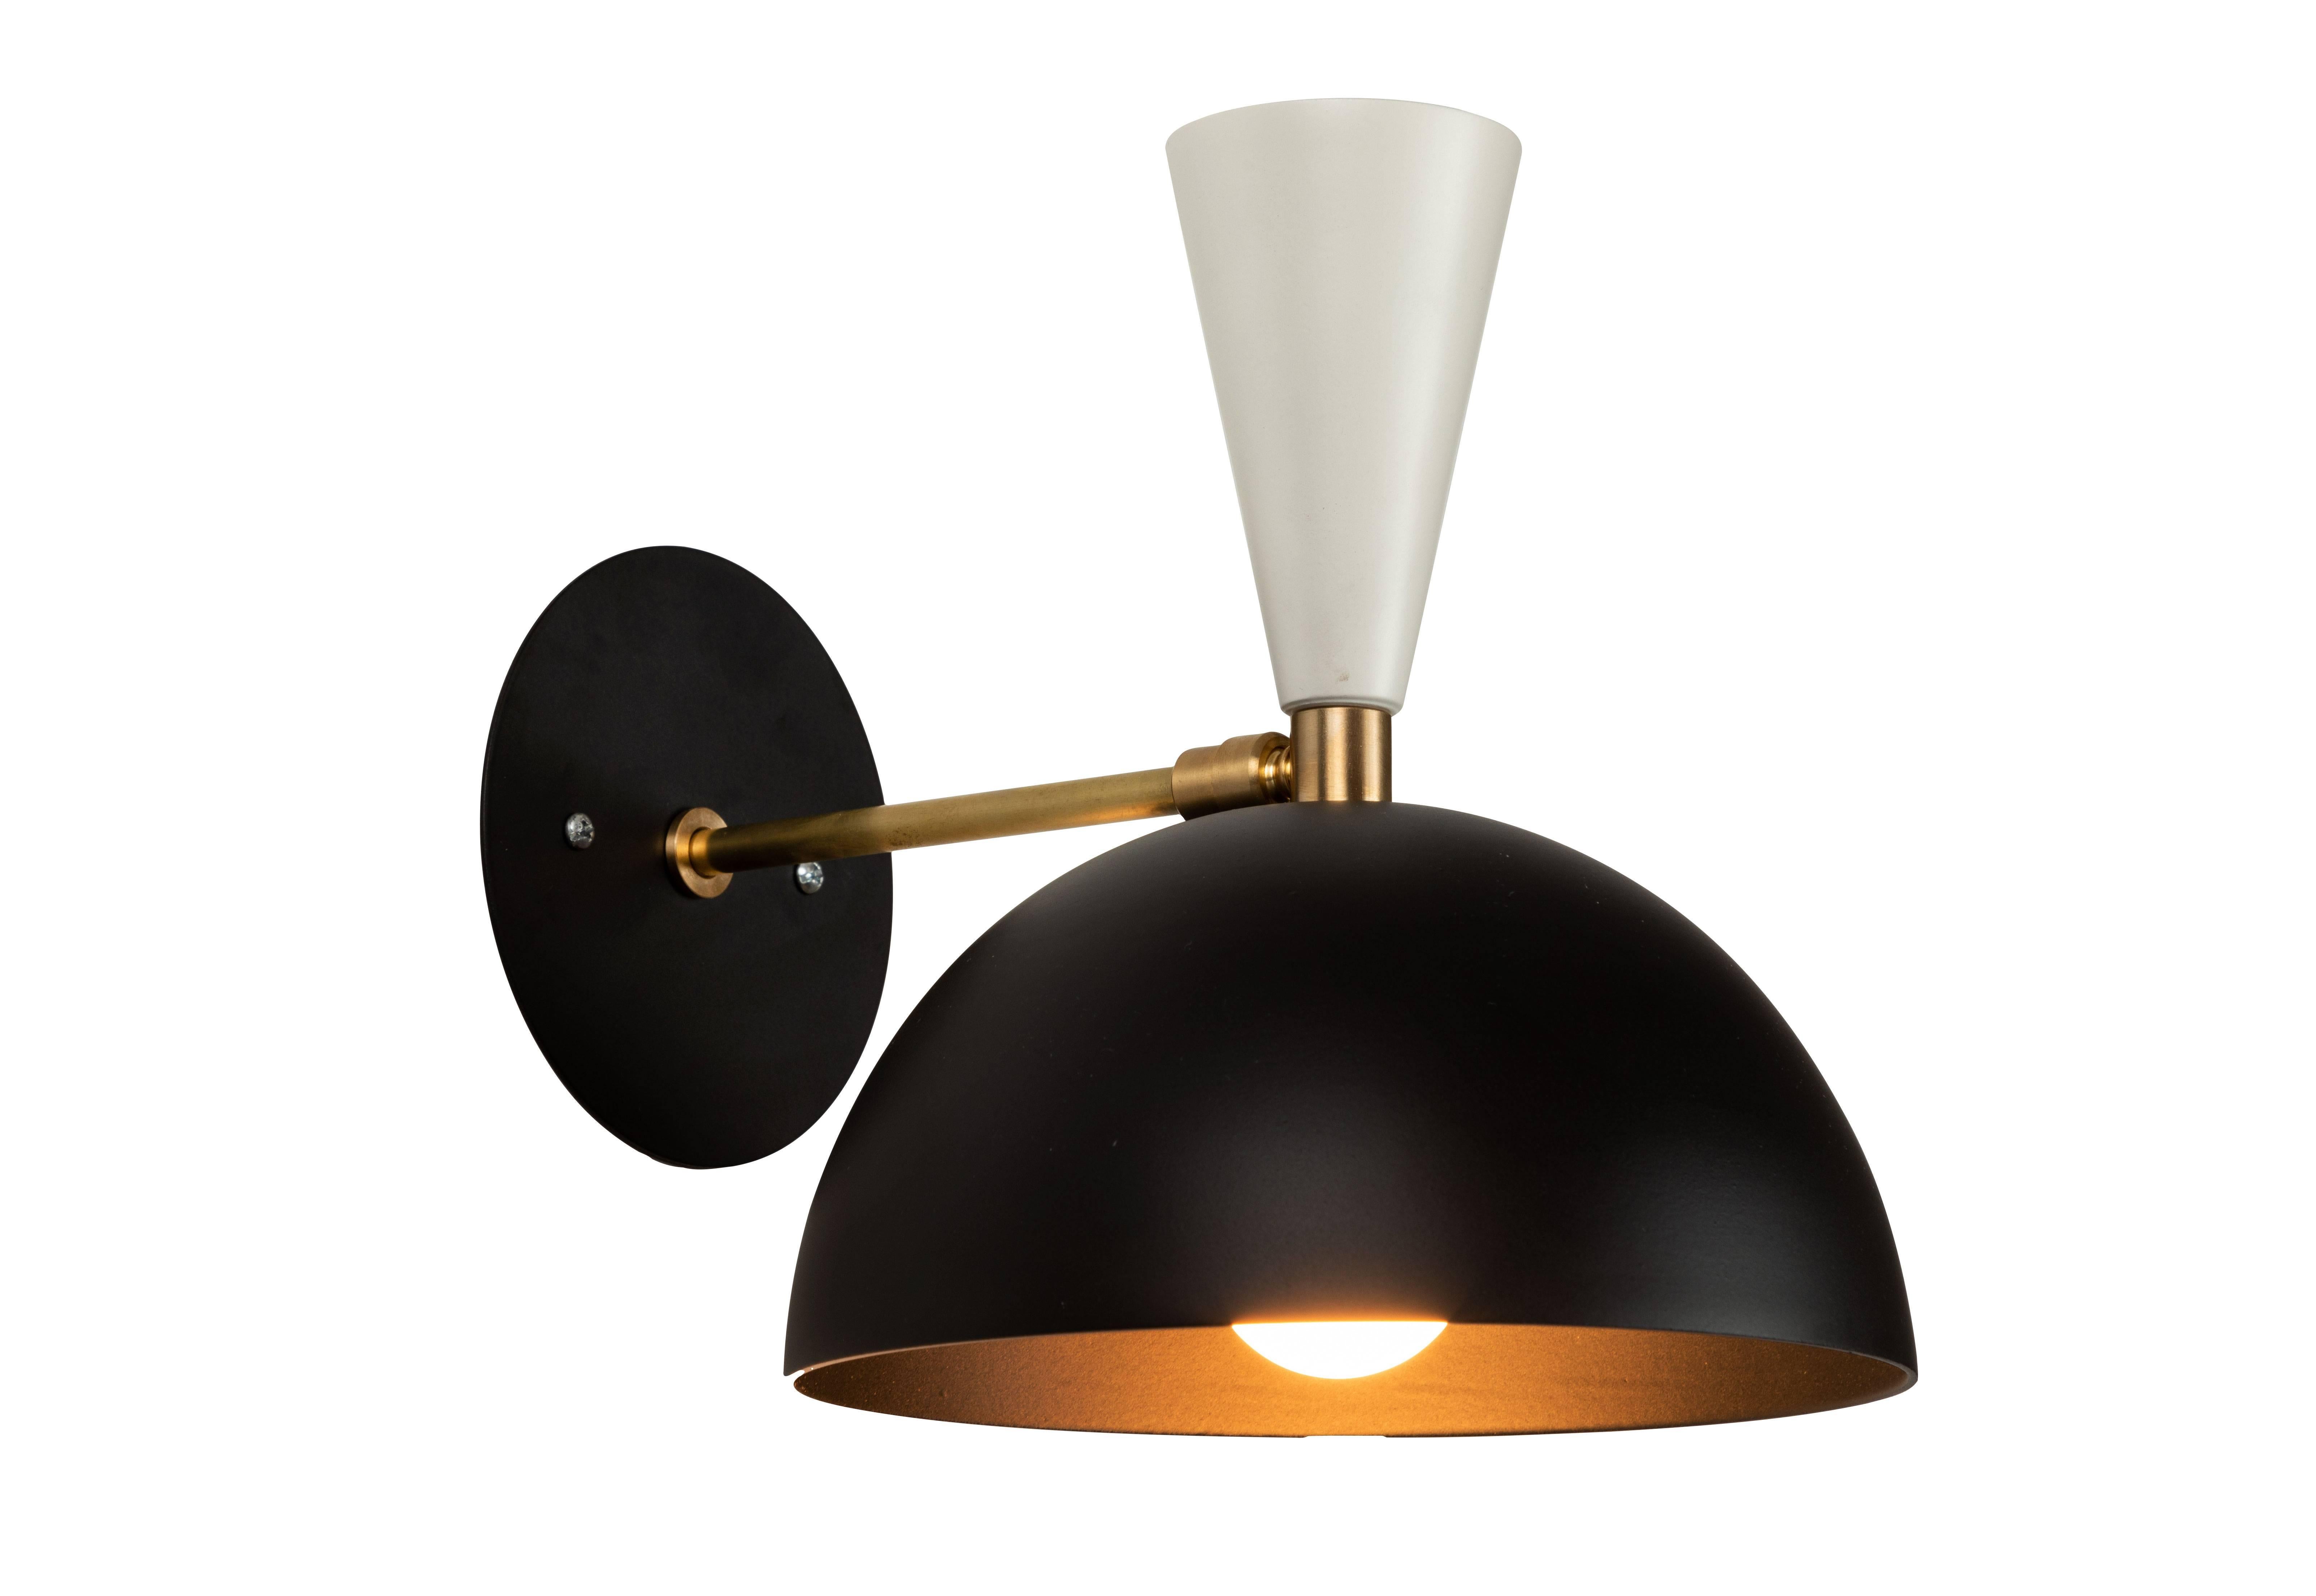 Pair of 'Lola' brass and metal adjustable sconces in black and white. 

Hand-fabricated by Los Angeles based designer and lighting professional Alvaro Benitez, these highly refined sconces are reminiscent of the iconic midcentury Italian designs of